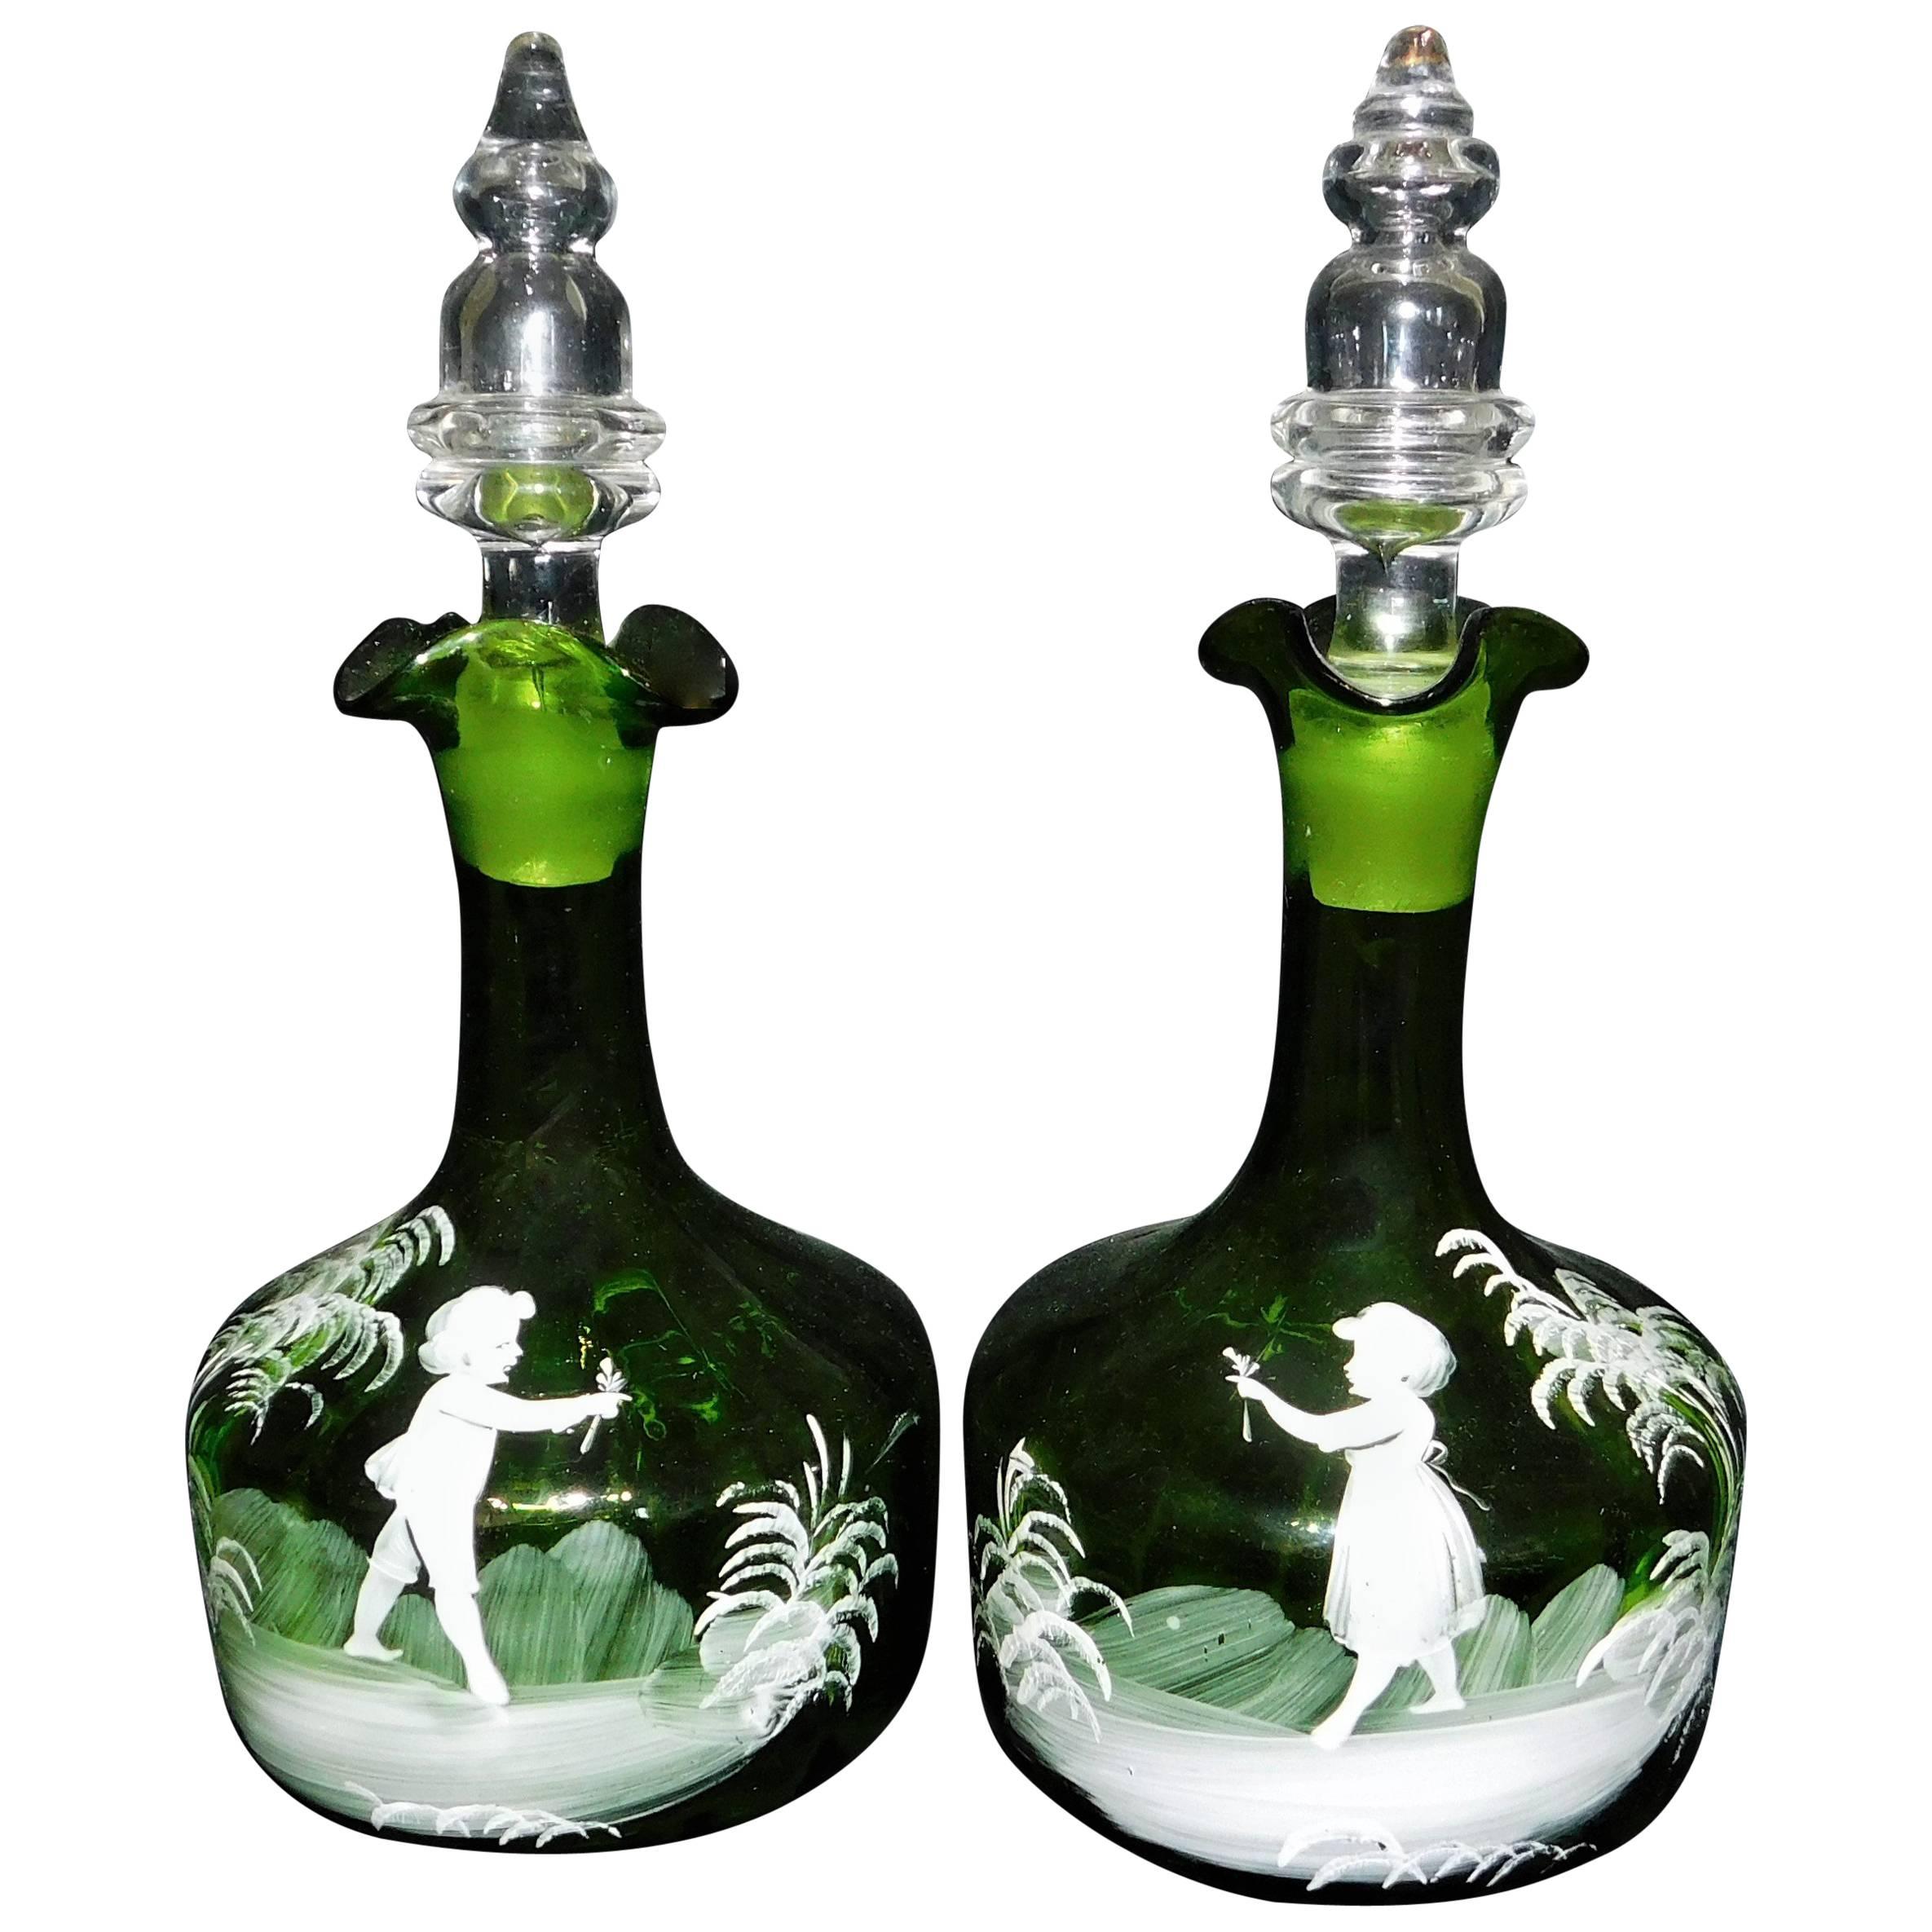 Pair of Antique Victorian Mary Gregory White Enameled Green Glass Decanters